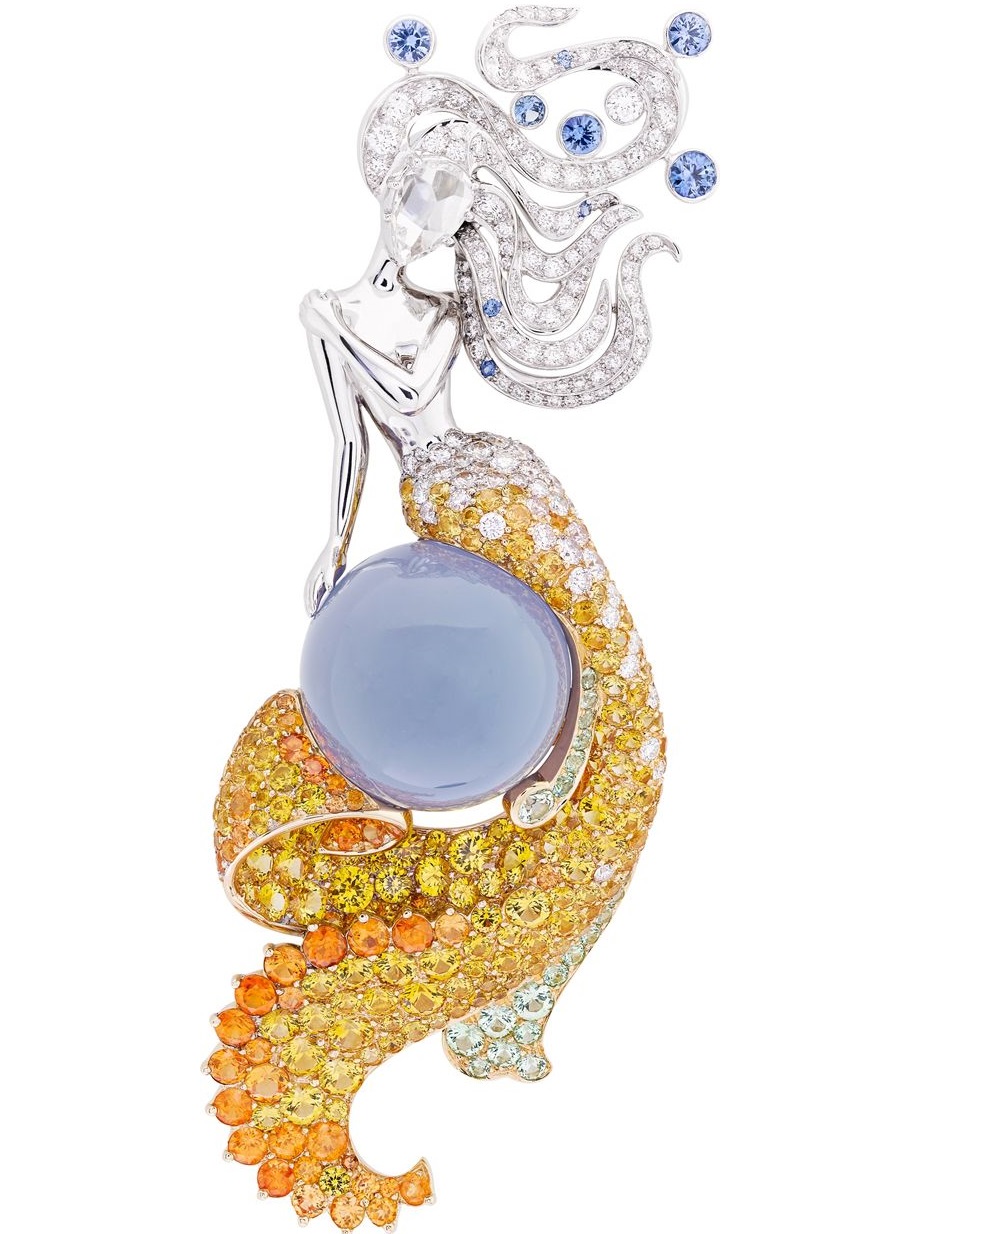 Van Cleef & Arpels ~ The ‘Seven Seas’ Collection 'Fairy of Sea' clip. Inspired by the Indian and Atlantic Oceans, the clip is set with diamonds, blue and yellow sapphires, spessartite and grossular garnets and a 23.64-carat cabochon chalcedony in white and yellow gold. 2015.